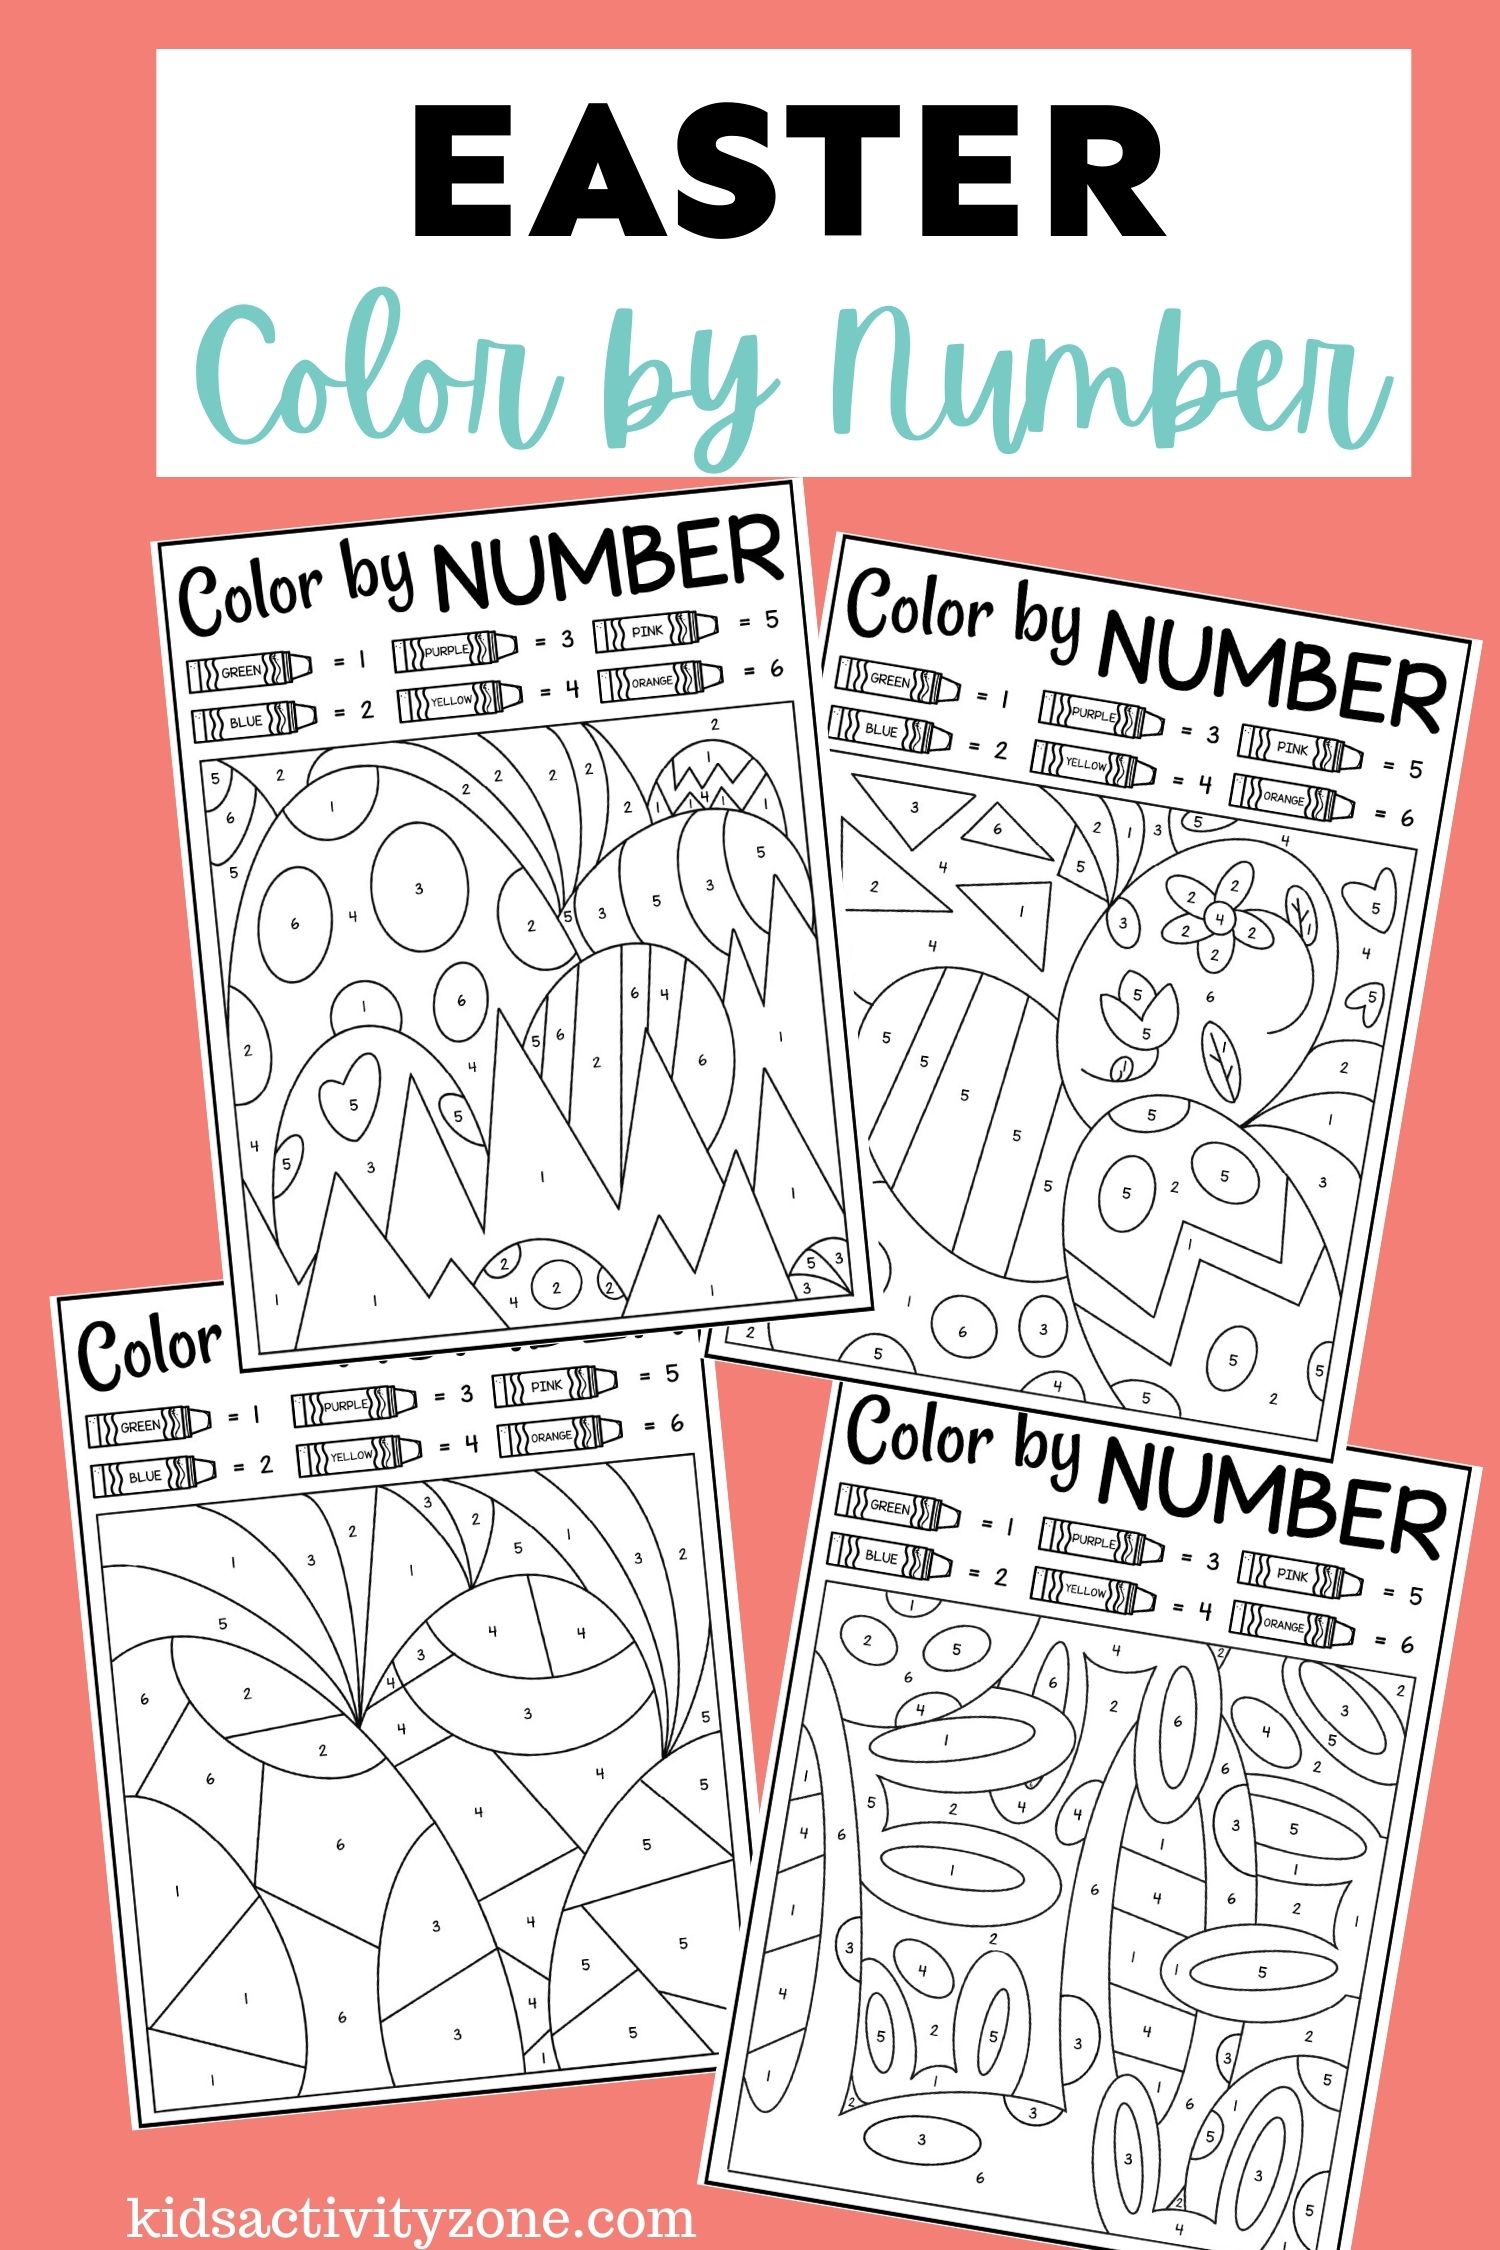 Easter Color By Number Coloring Sheets - Featured Image